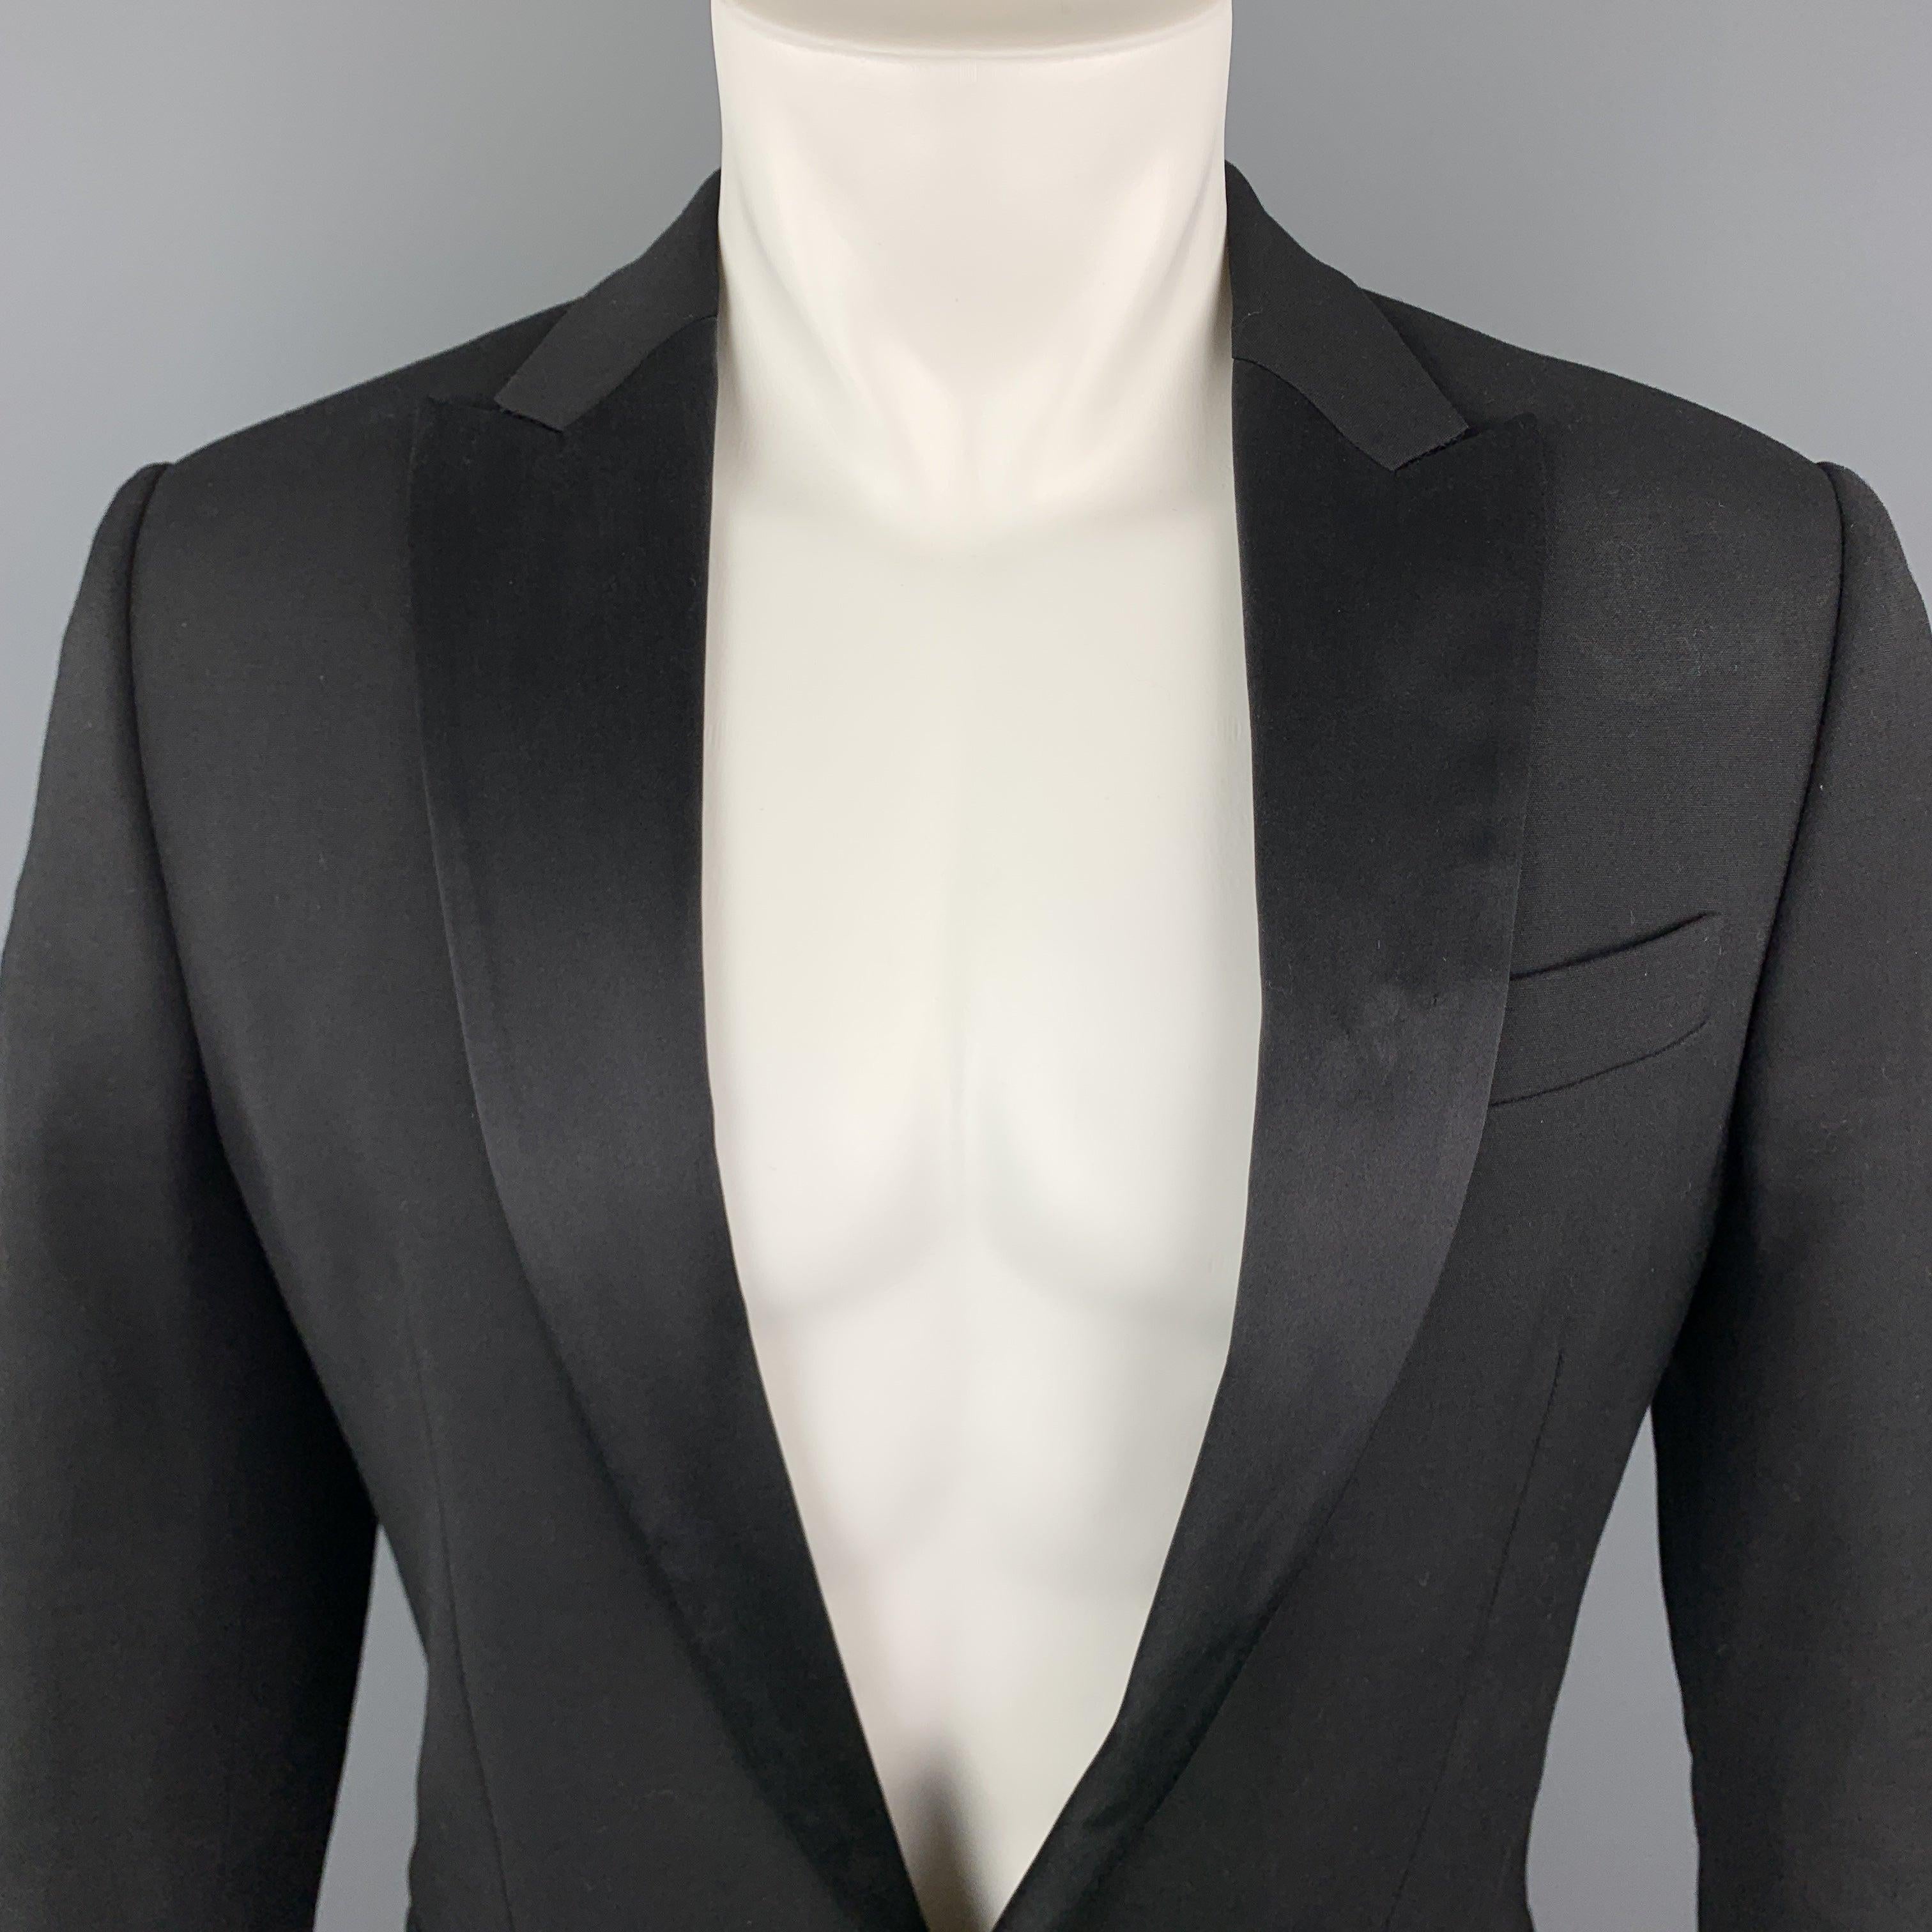 DSQUARED2
tuxedo dinner jacket comes in stretch woven wool with a satin peak lapel, single breasted, one button front, and functional button cuffs. Made in Italy.Excellent Pre-Owned Condition.
 

Marked:   IT 50 

Measurements: 
 
Shoulder: 18